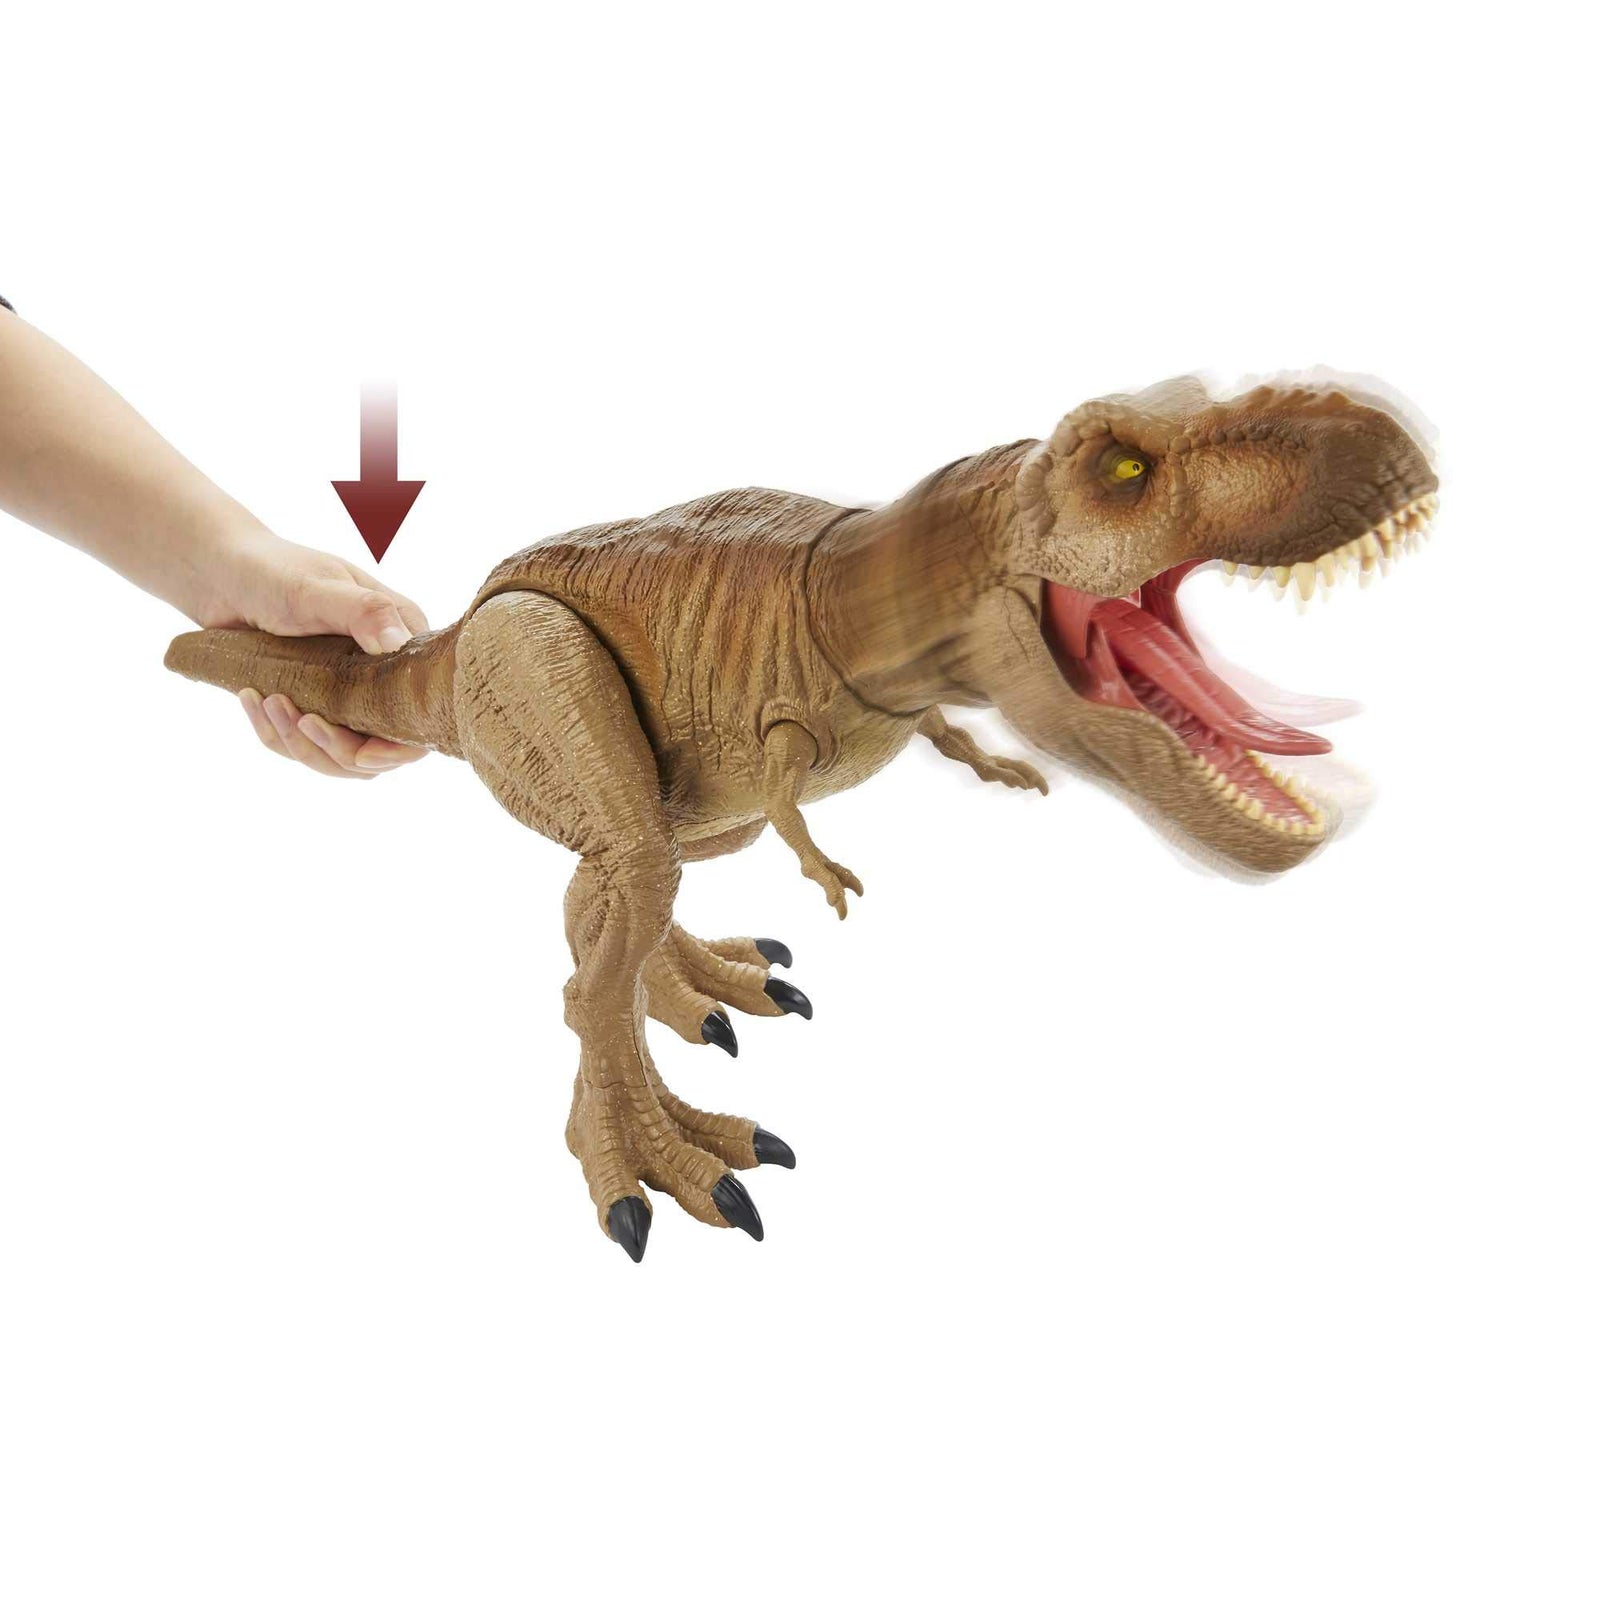 Jurassic World Epic Roarin’ Tyrannosaurus Rex Large Action Figure with Primal Attack Feature, Sound, Realistic Shaking, Movable Joints; Ages 4 Years & Up